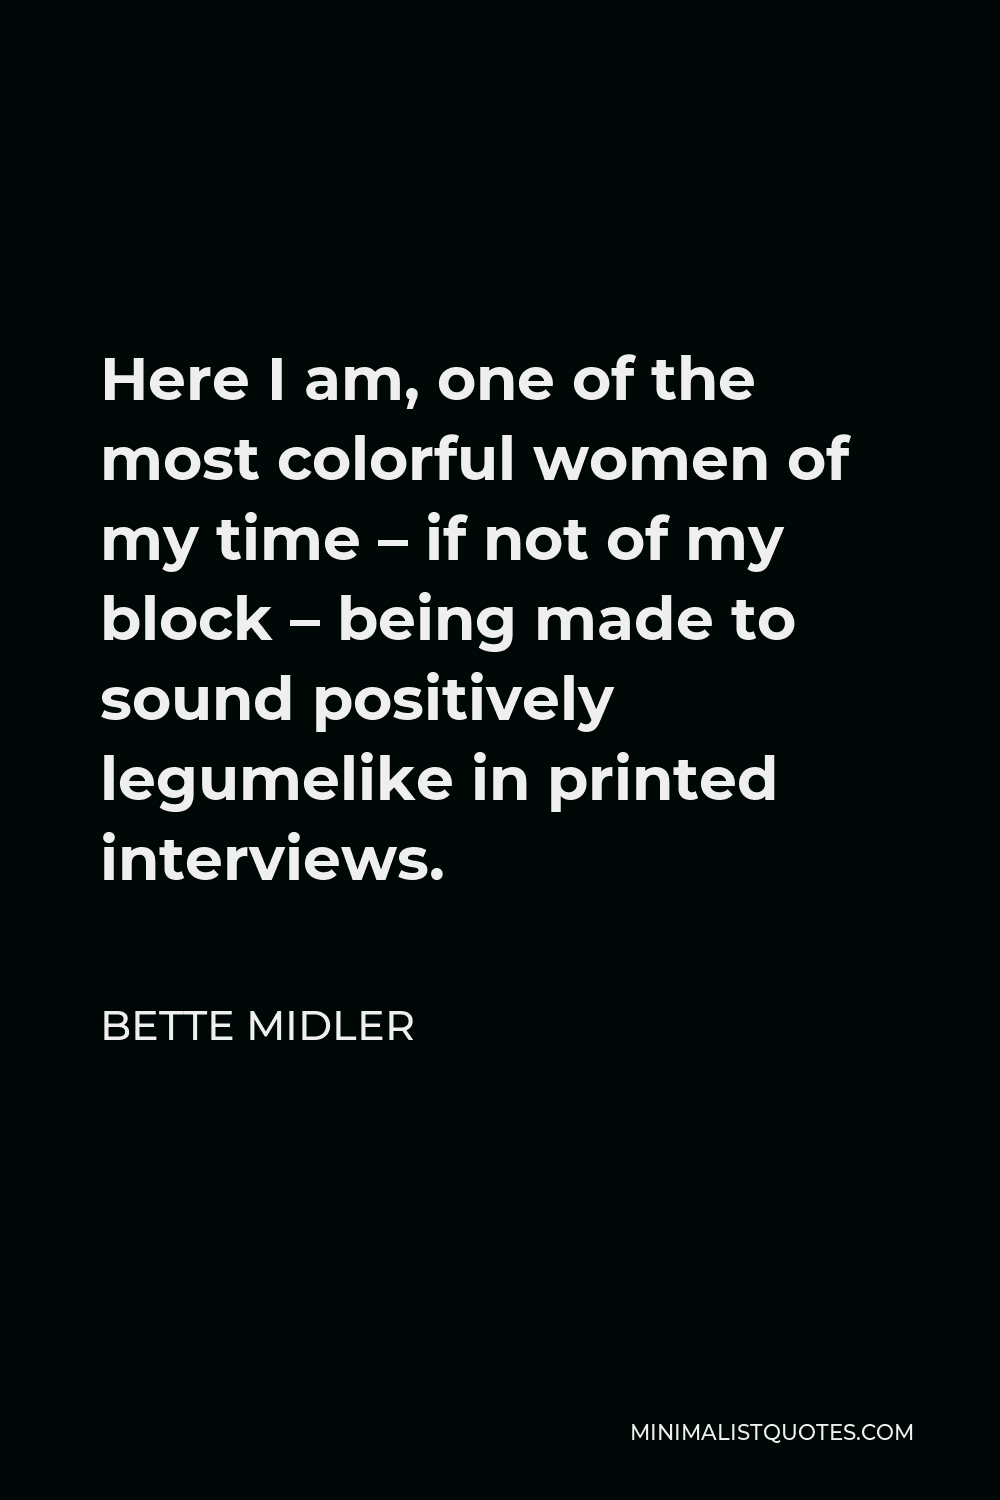 Bette Midler Quote - Here I am, one of the most colorful women of my time – if not of my block – being made to sound positively legumelike in printed interviews.